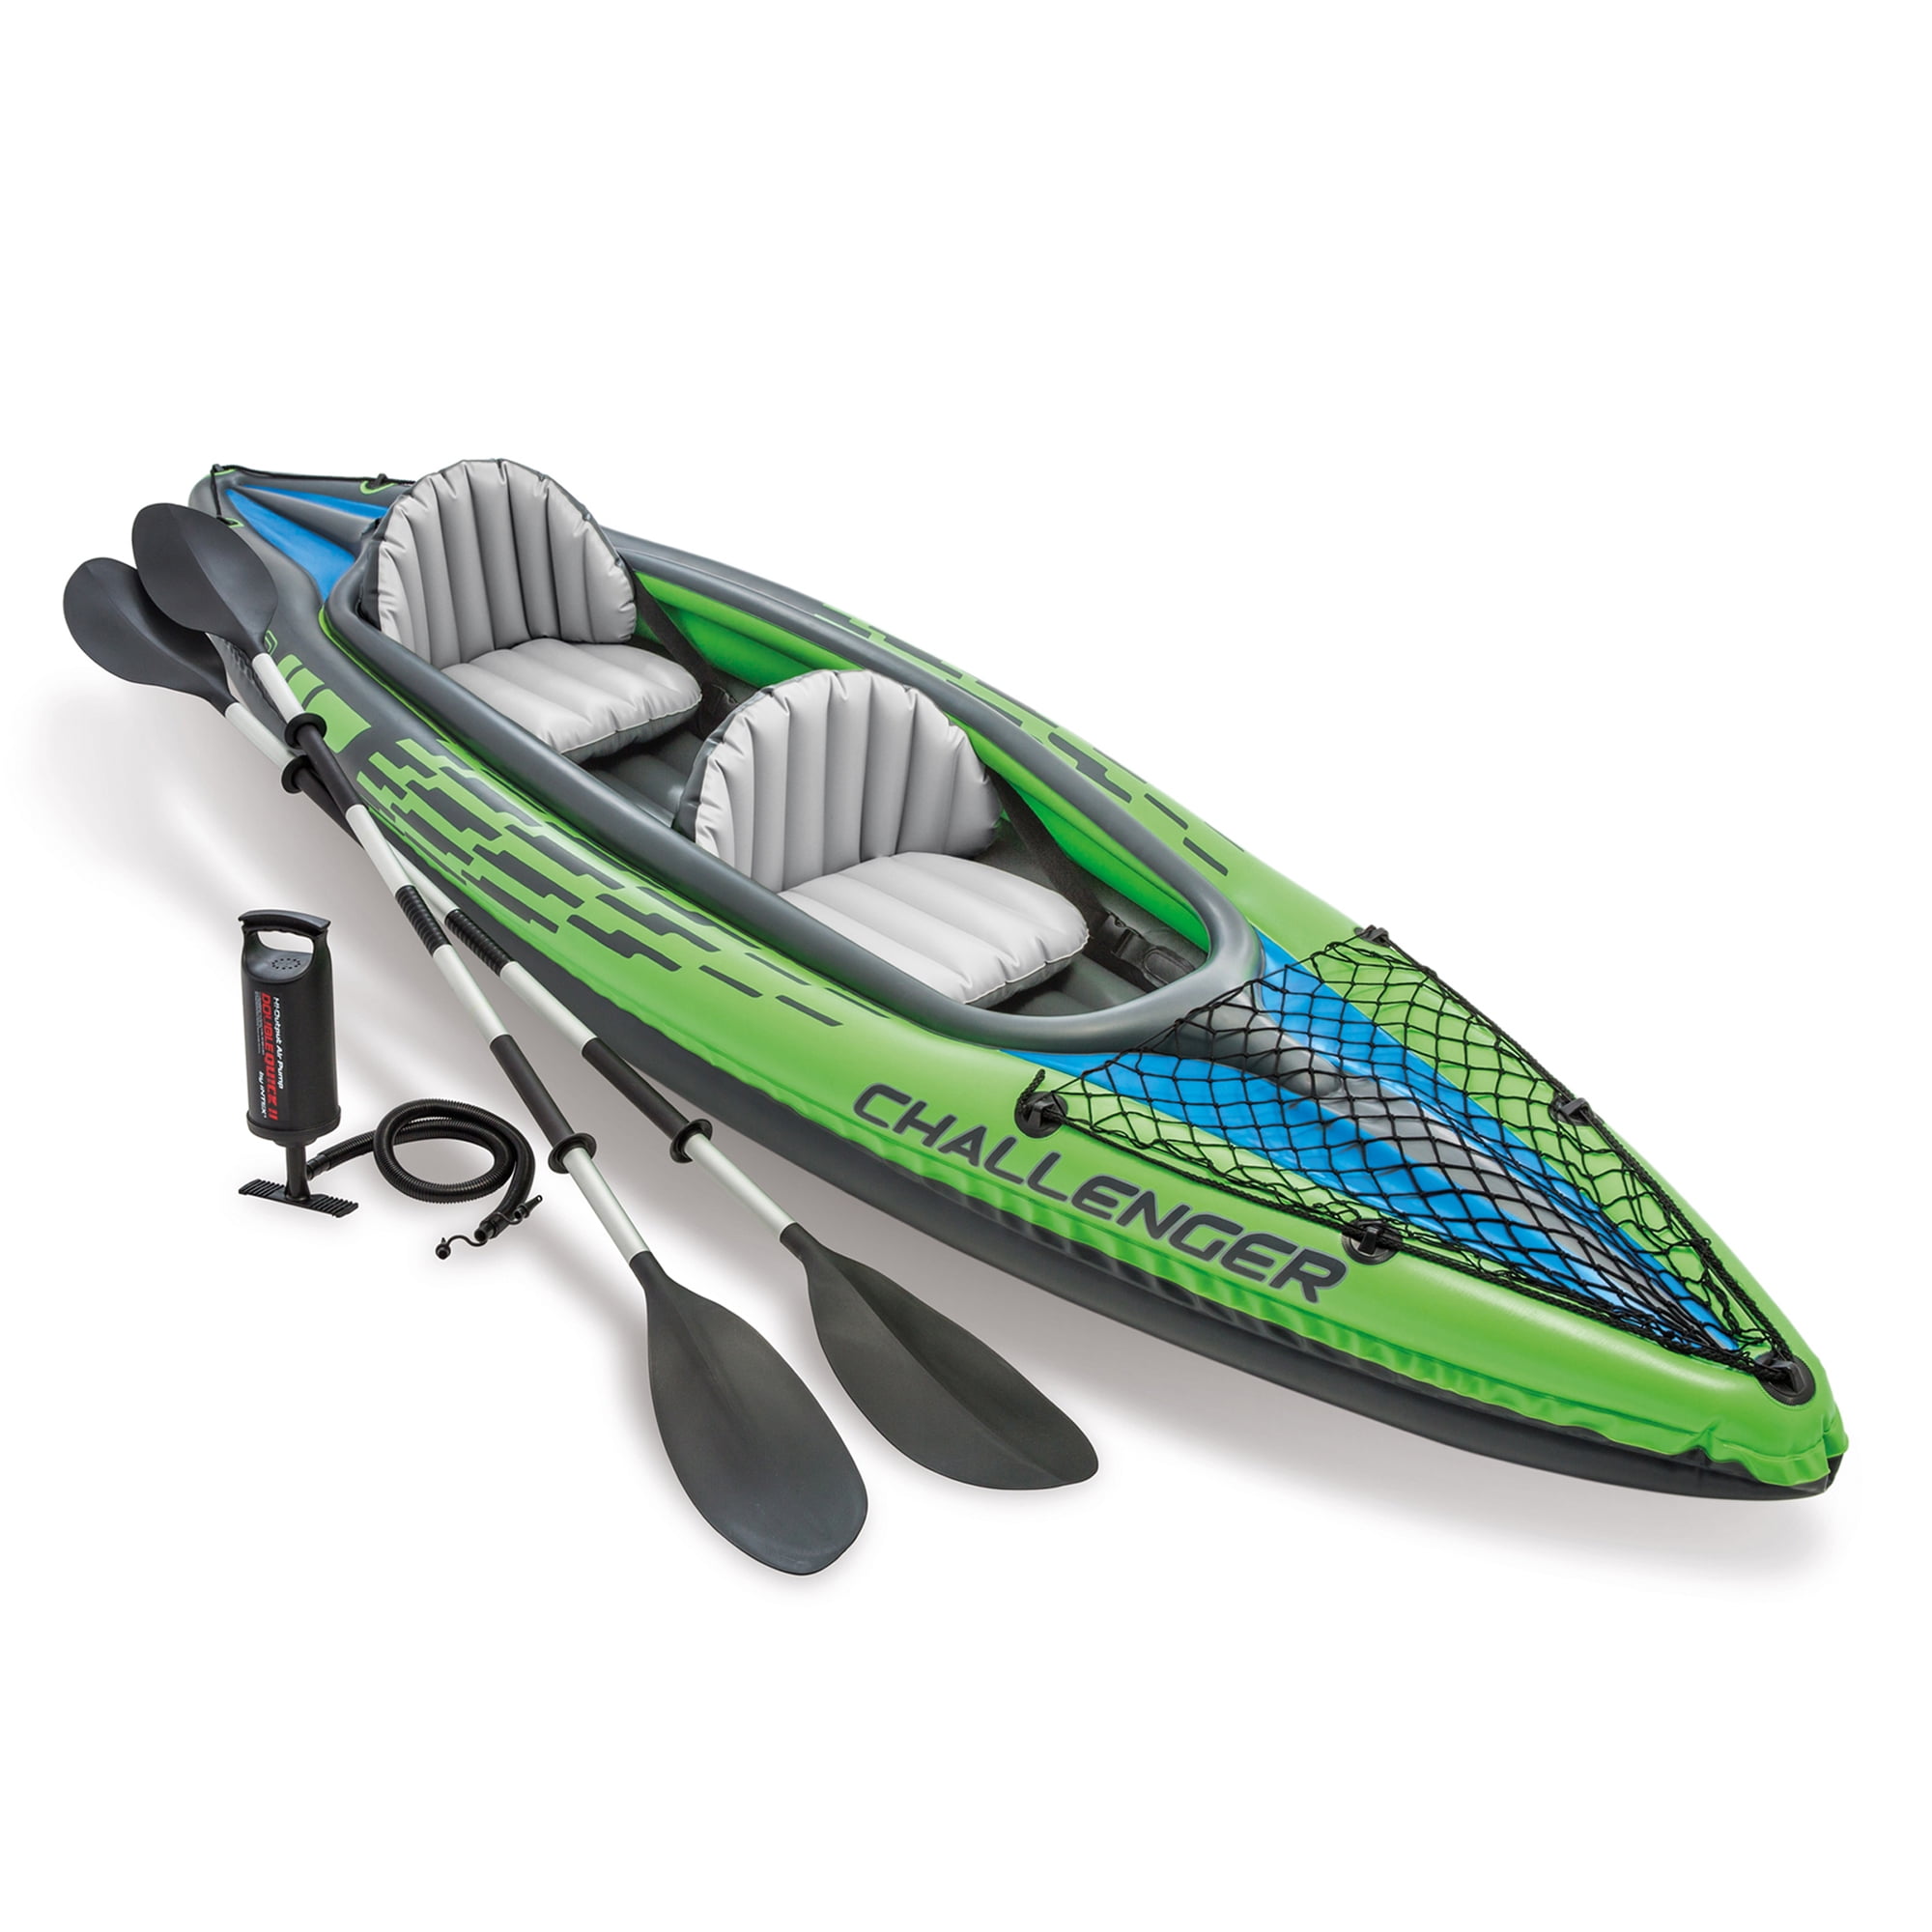 Intex Challenger K2 Inflatable Kayak with Oars and Hand Pump 